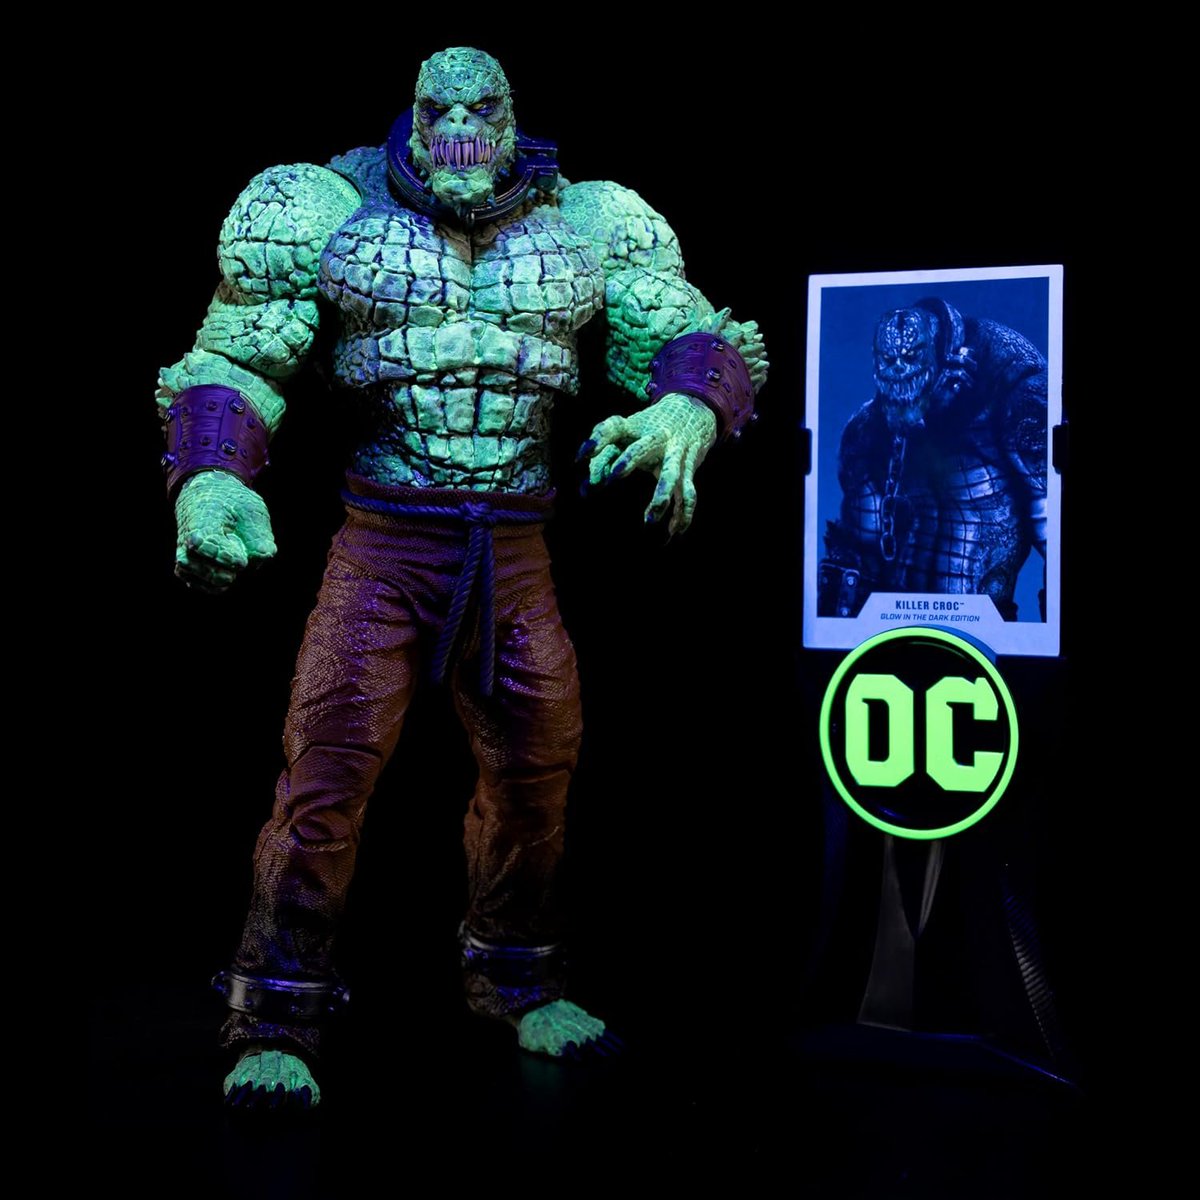 McF DC Multiverse Gold Label Glow in the Dark Killer Croc up for preorder at Amazon (exclusive), $49.99 amzn.to/3K7m08K #ad